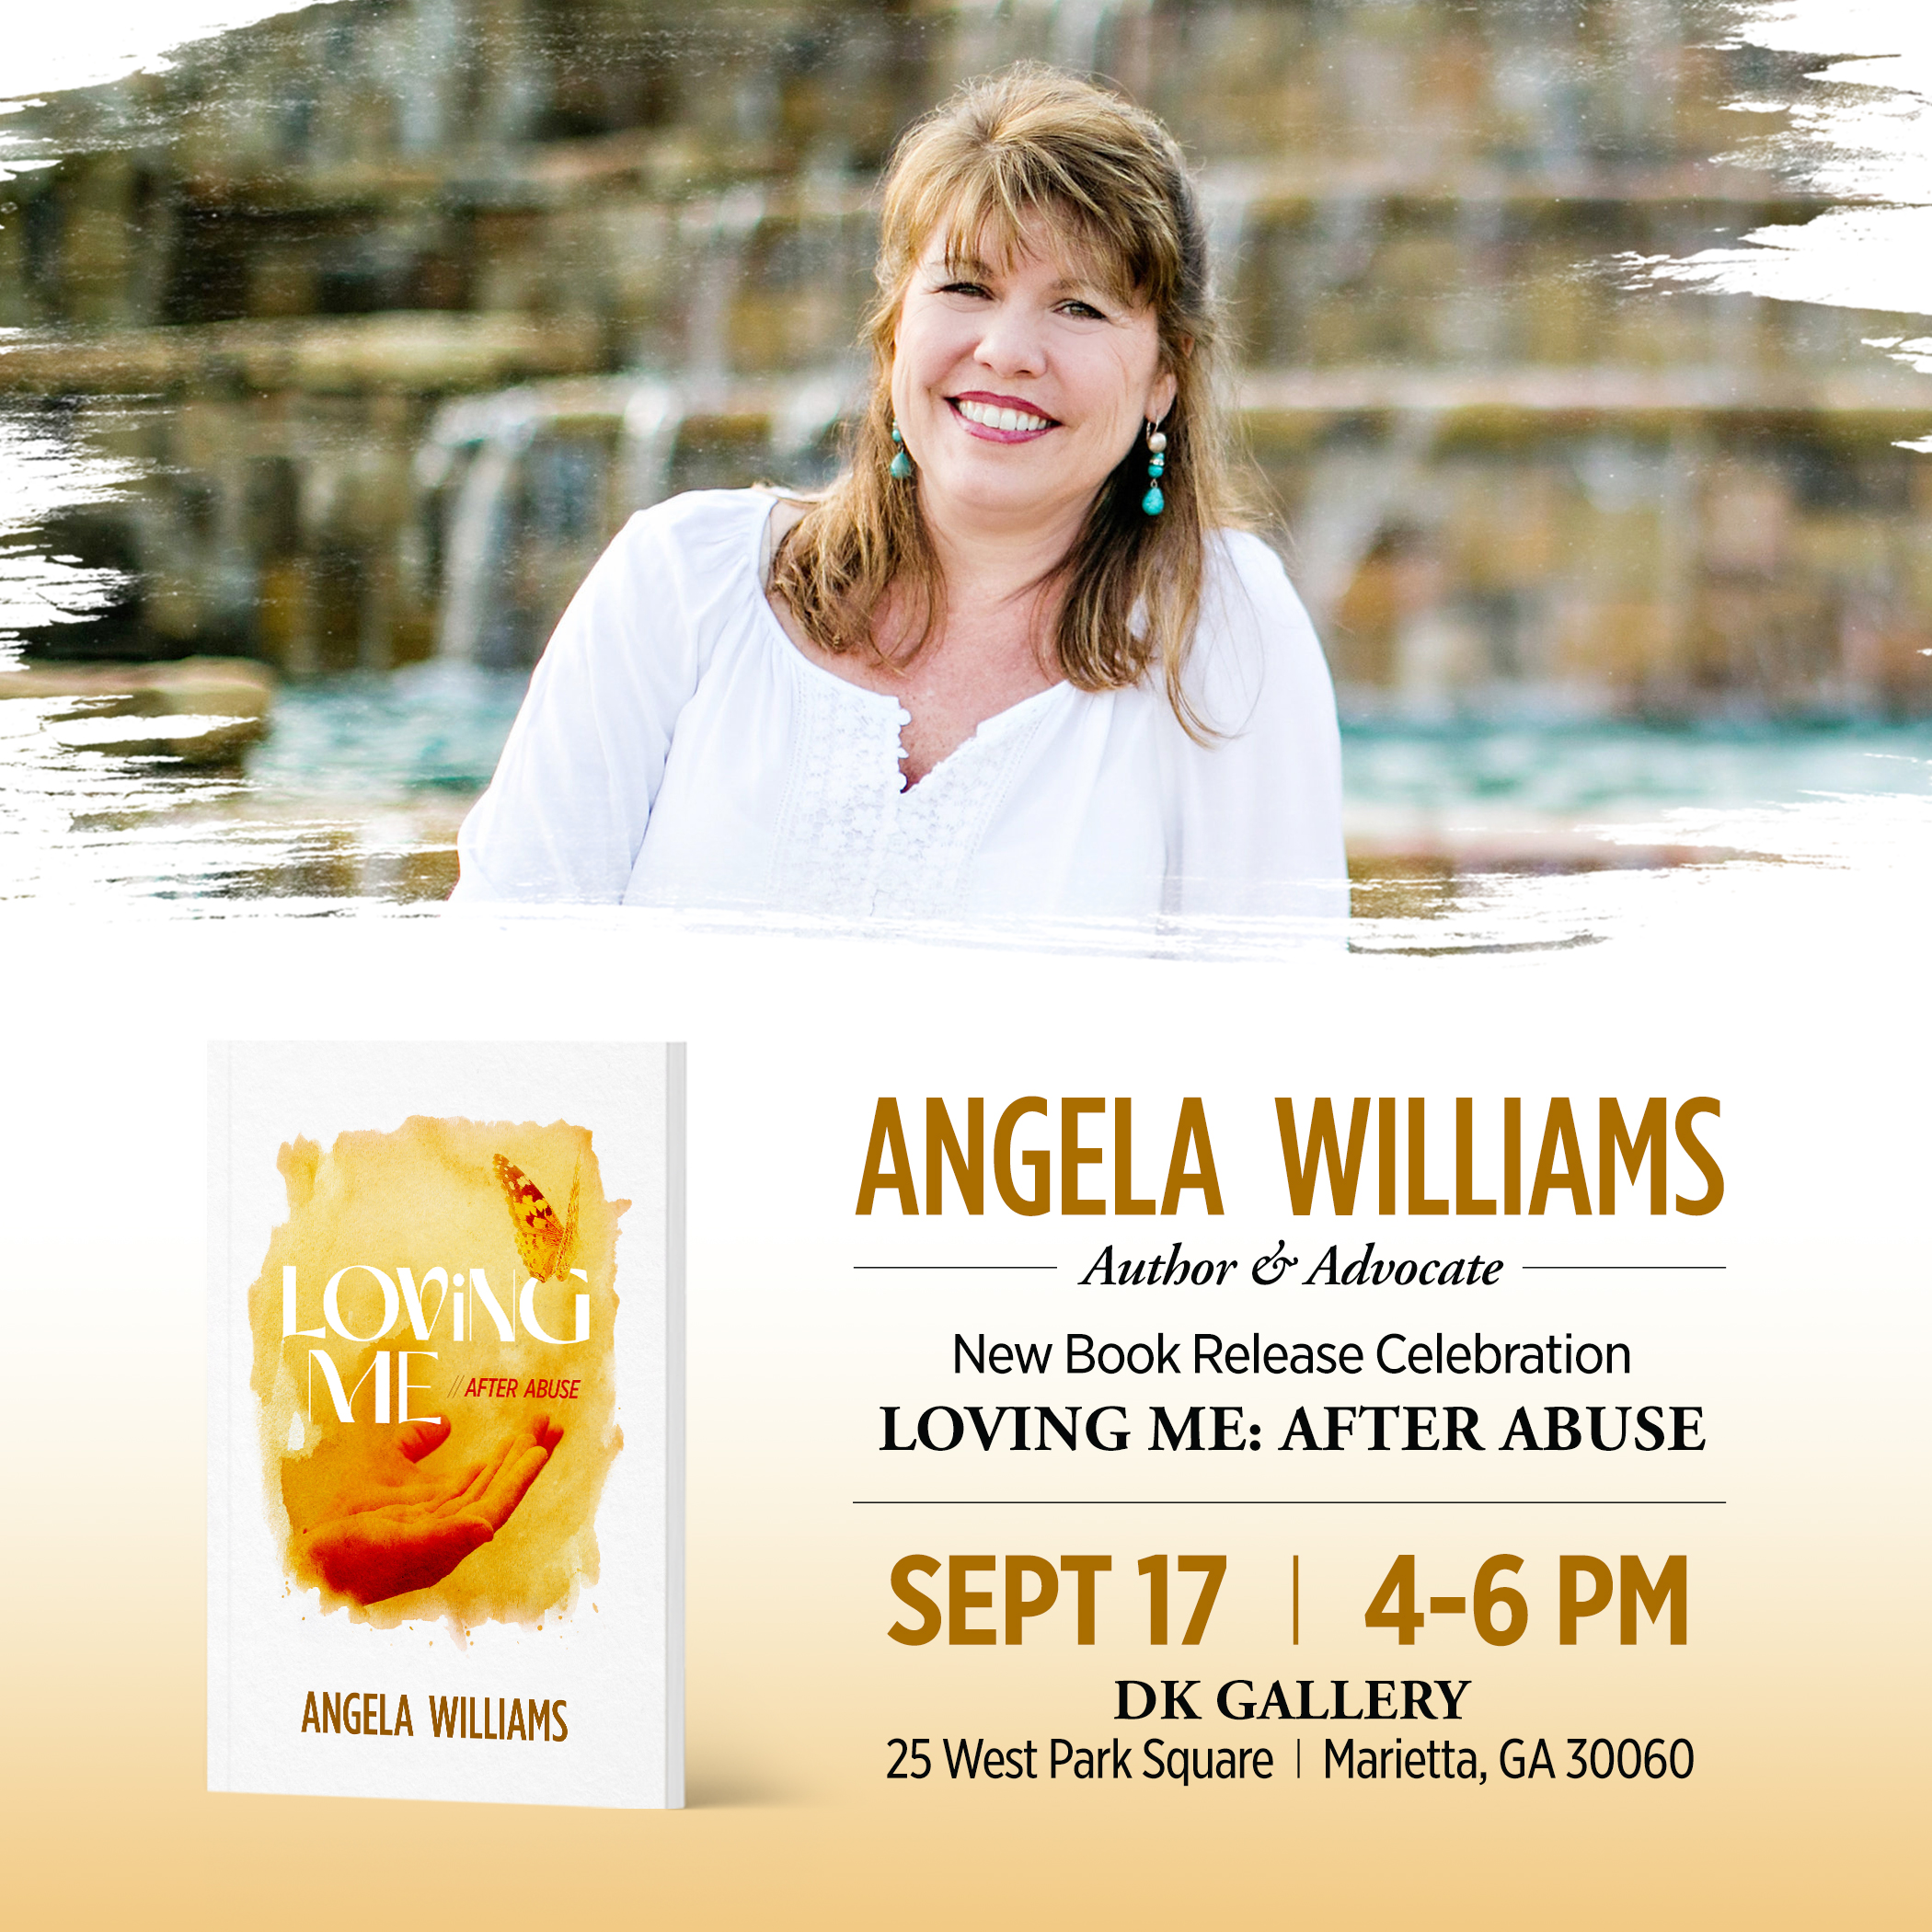 Loving Me: After Abuse Book Launch Celebration